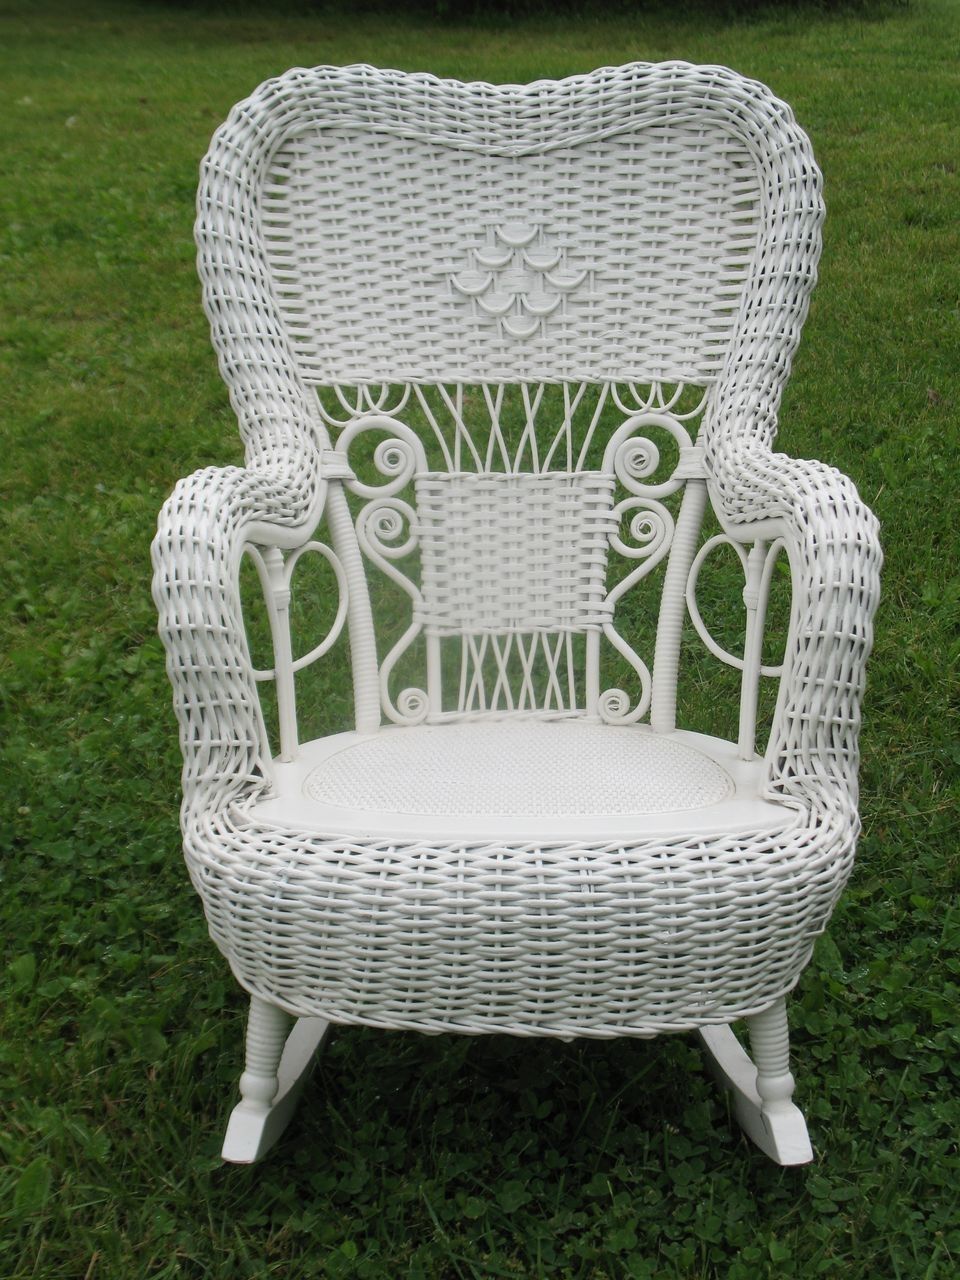 Chair | Wicker Porch Rockers Outdoor Furniture Wooden Garden Rocking Within White Resin Patio Rocking Chairs (View 15 of 15)